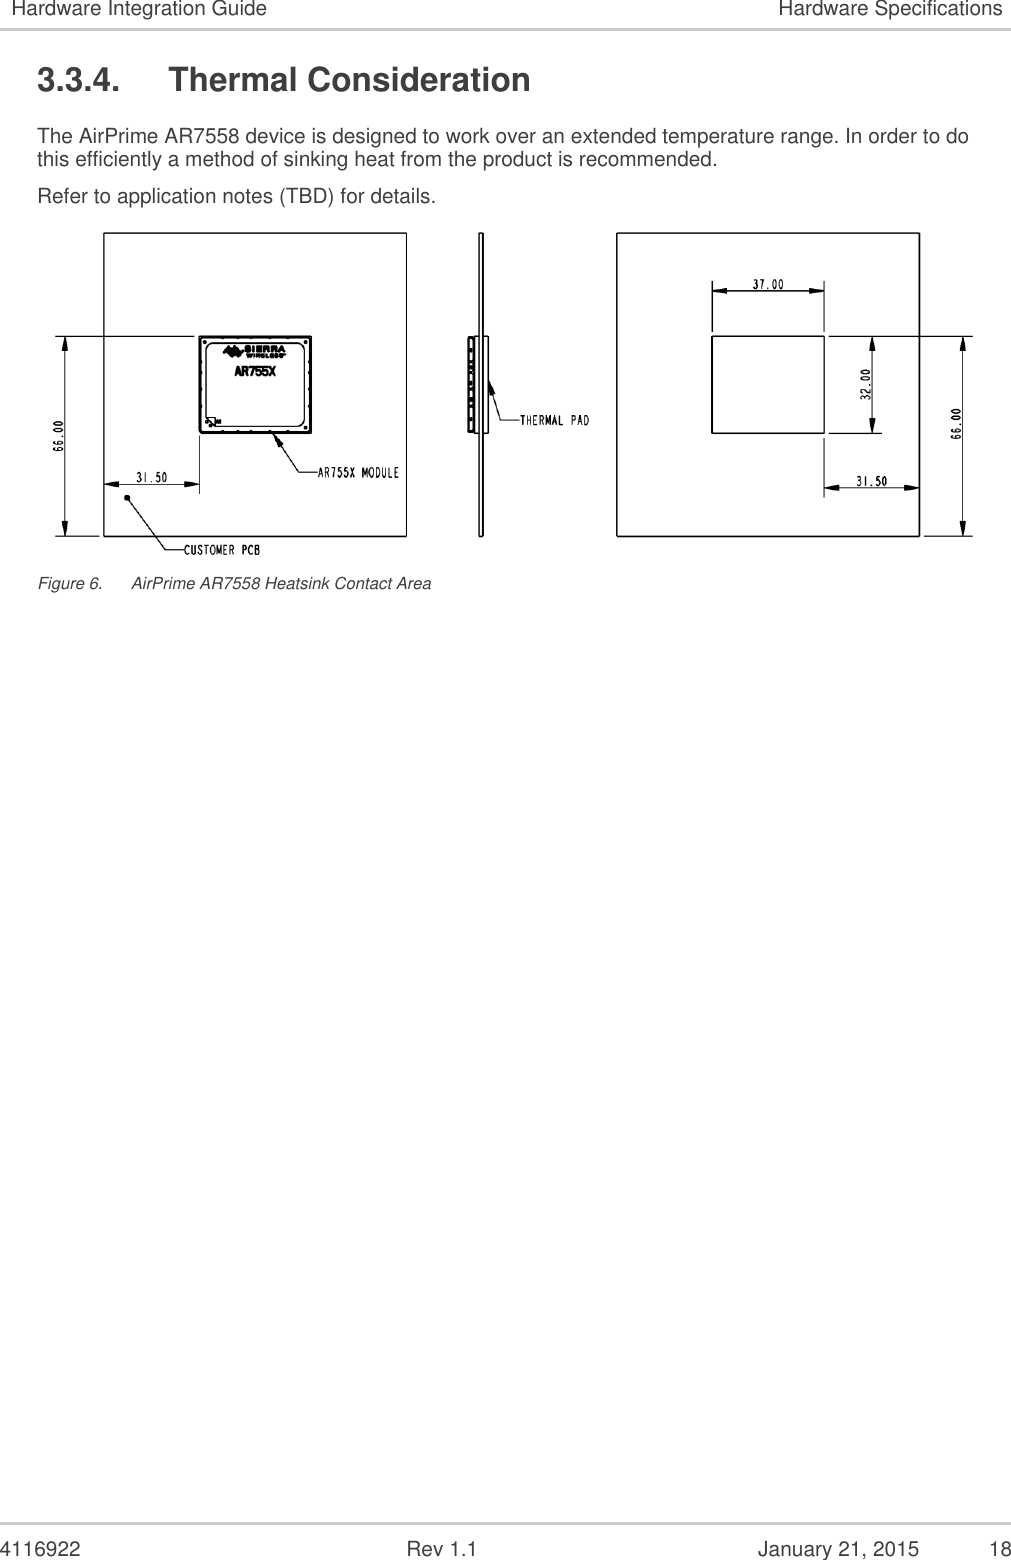   4116922              Rev 1.1          January 21, 2015  18 Hardware Integration Guide Hardware Specifications 3.3.4.  Thermal Consideration The AirPrime AR7558 device is designed to work over an extended temperature range. In order to do this efficiently a method of sinking heat from the product is recommended. Refer to application notes (TBD) for details.  Figure 6.  AirPrime AR7558 Heatsink Contact Area 